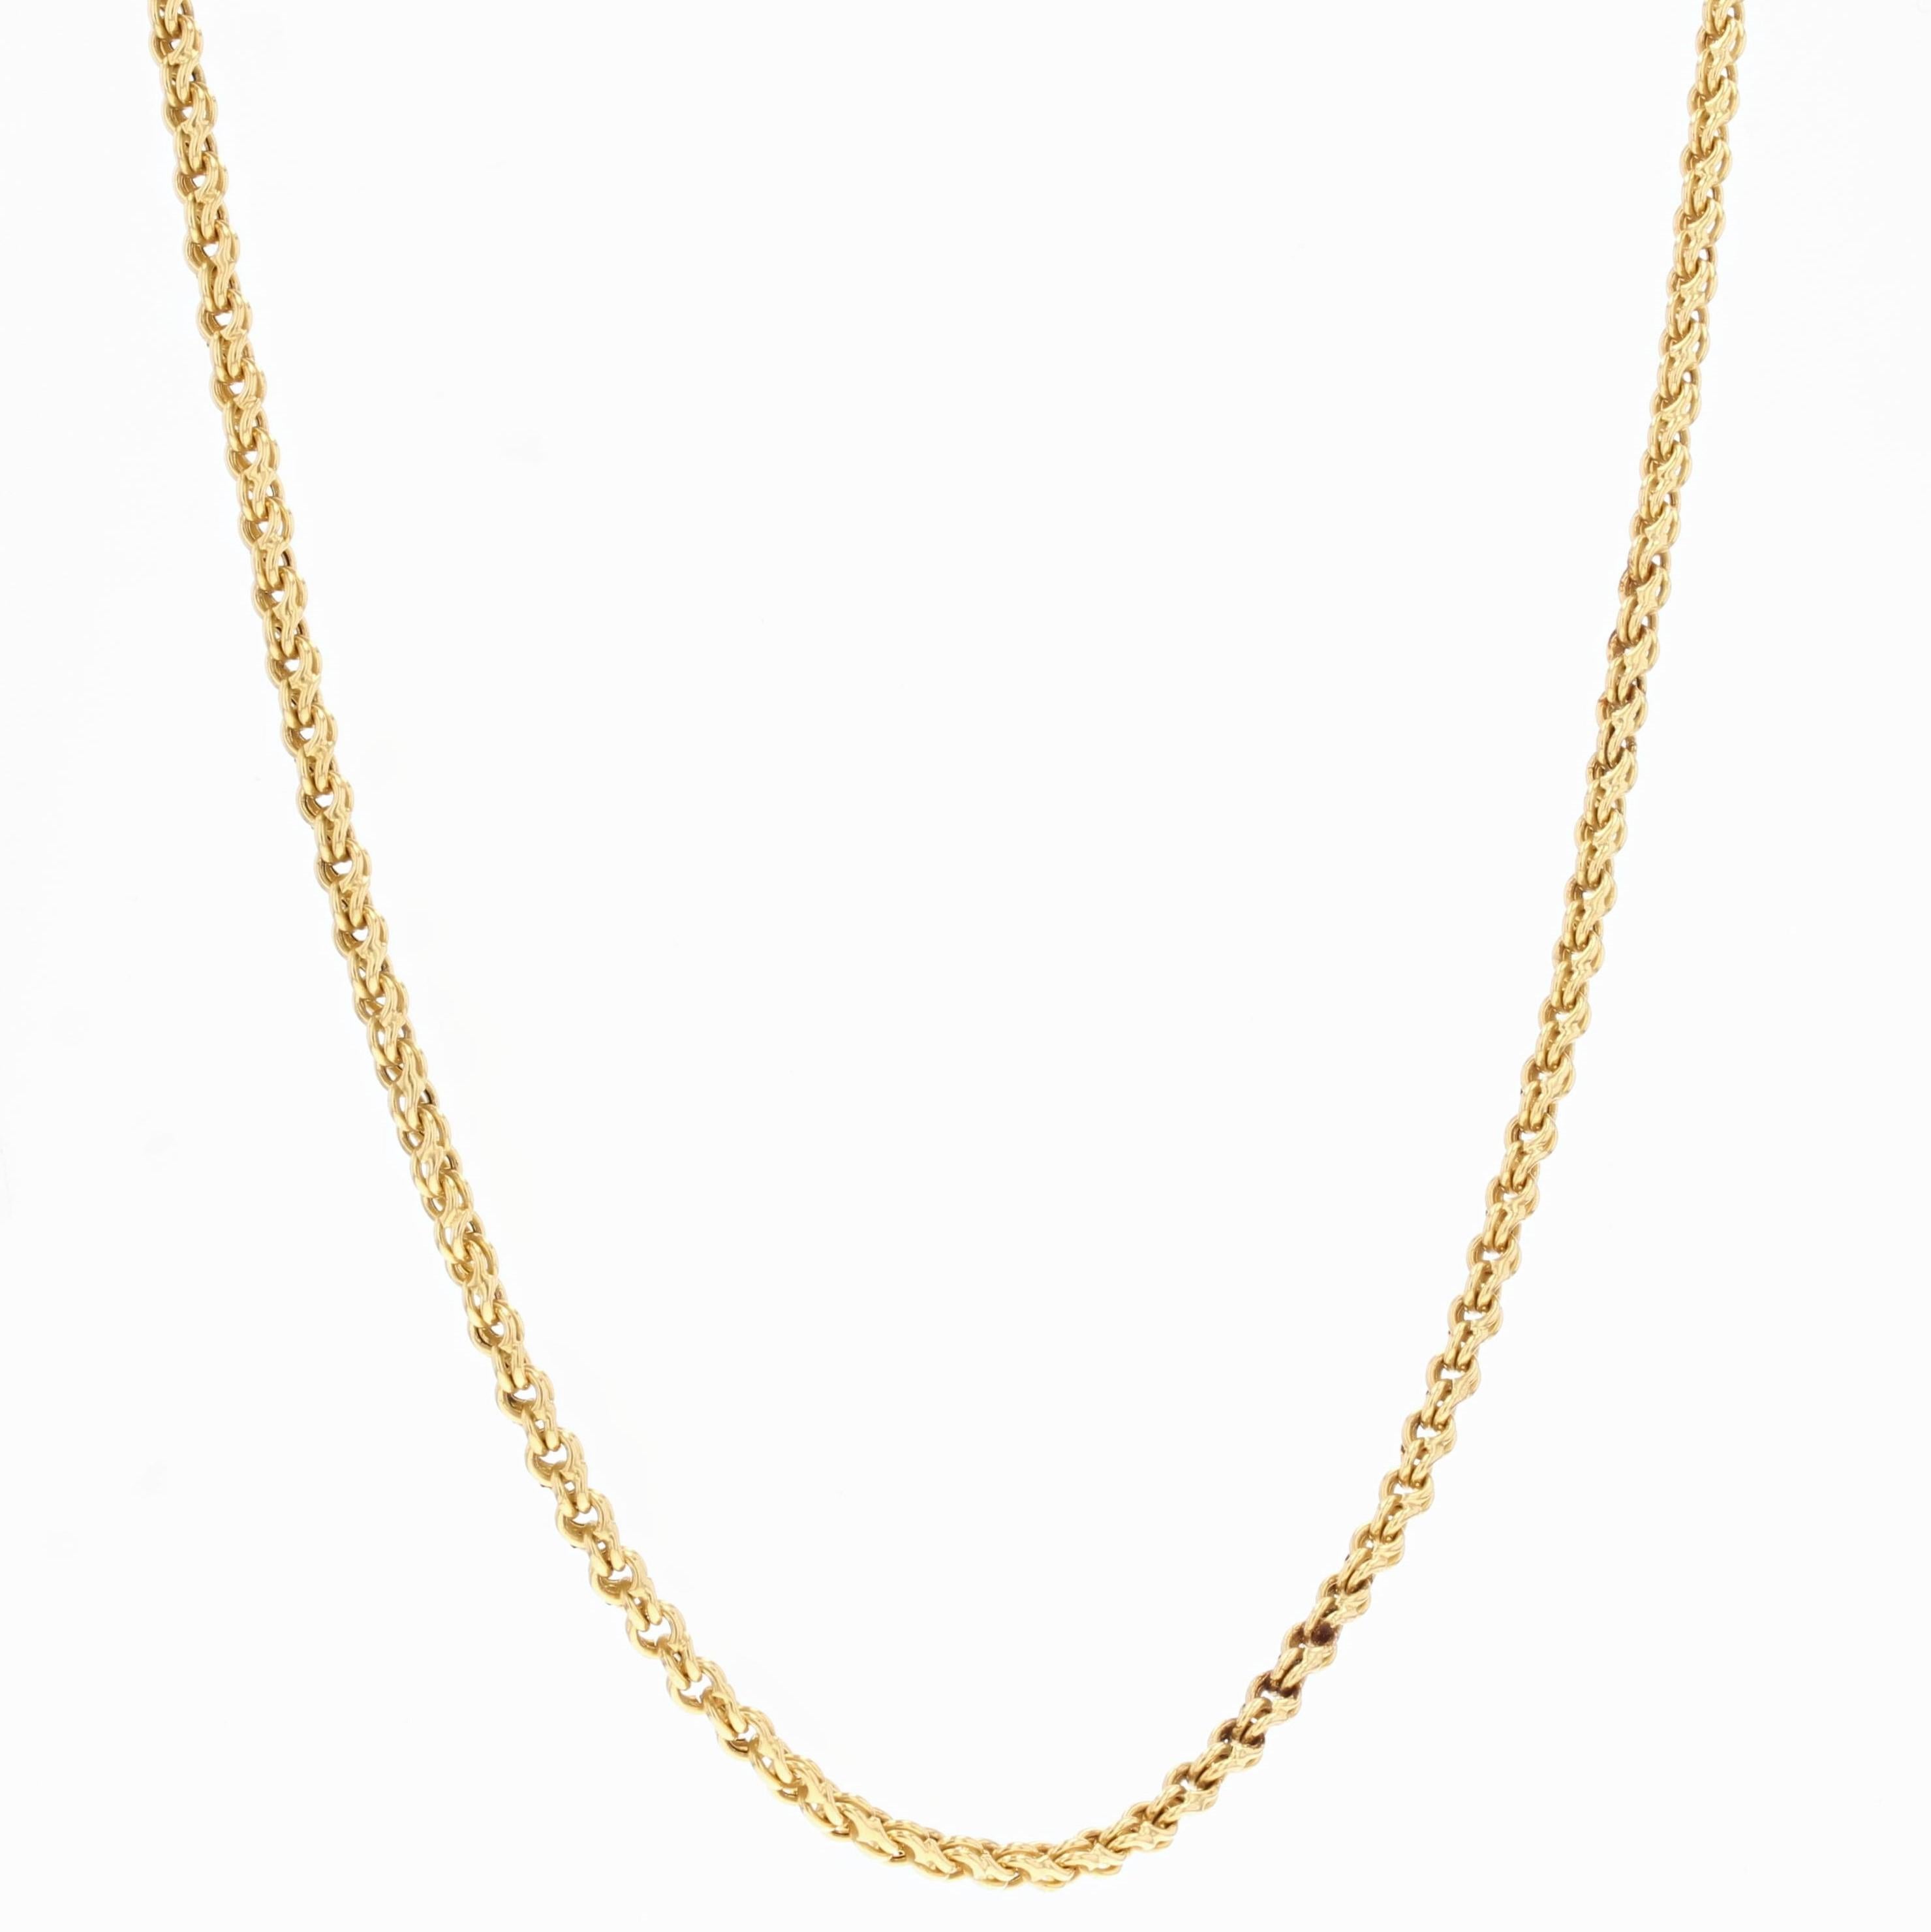 Chain in 18 karat yellow gold.
Splendid antique chain it is formed of a double jaseron mesh. The clasp is a spring ring.
Length : 72 cm, thickness : 2.8 mm.
Total weight of the jewel : 24,3 g approximately.
Authentic antique jewelry - Work of the